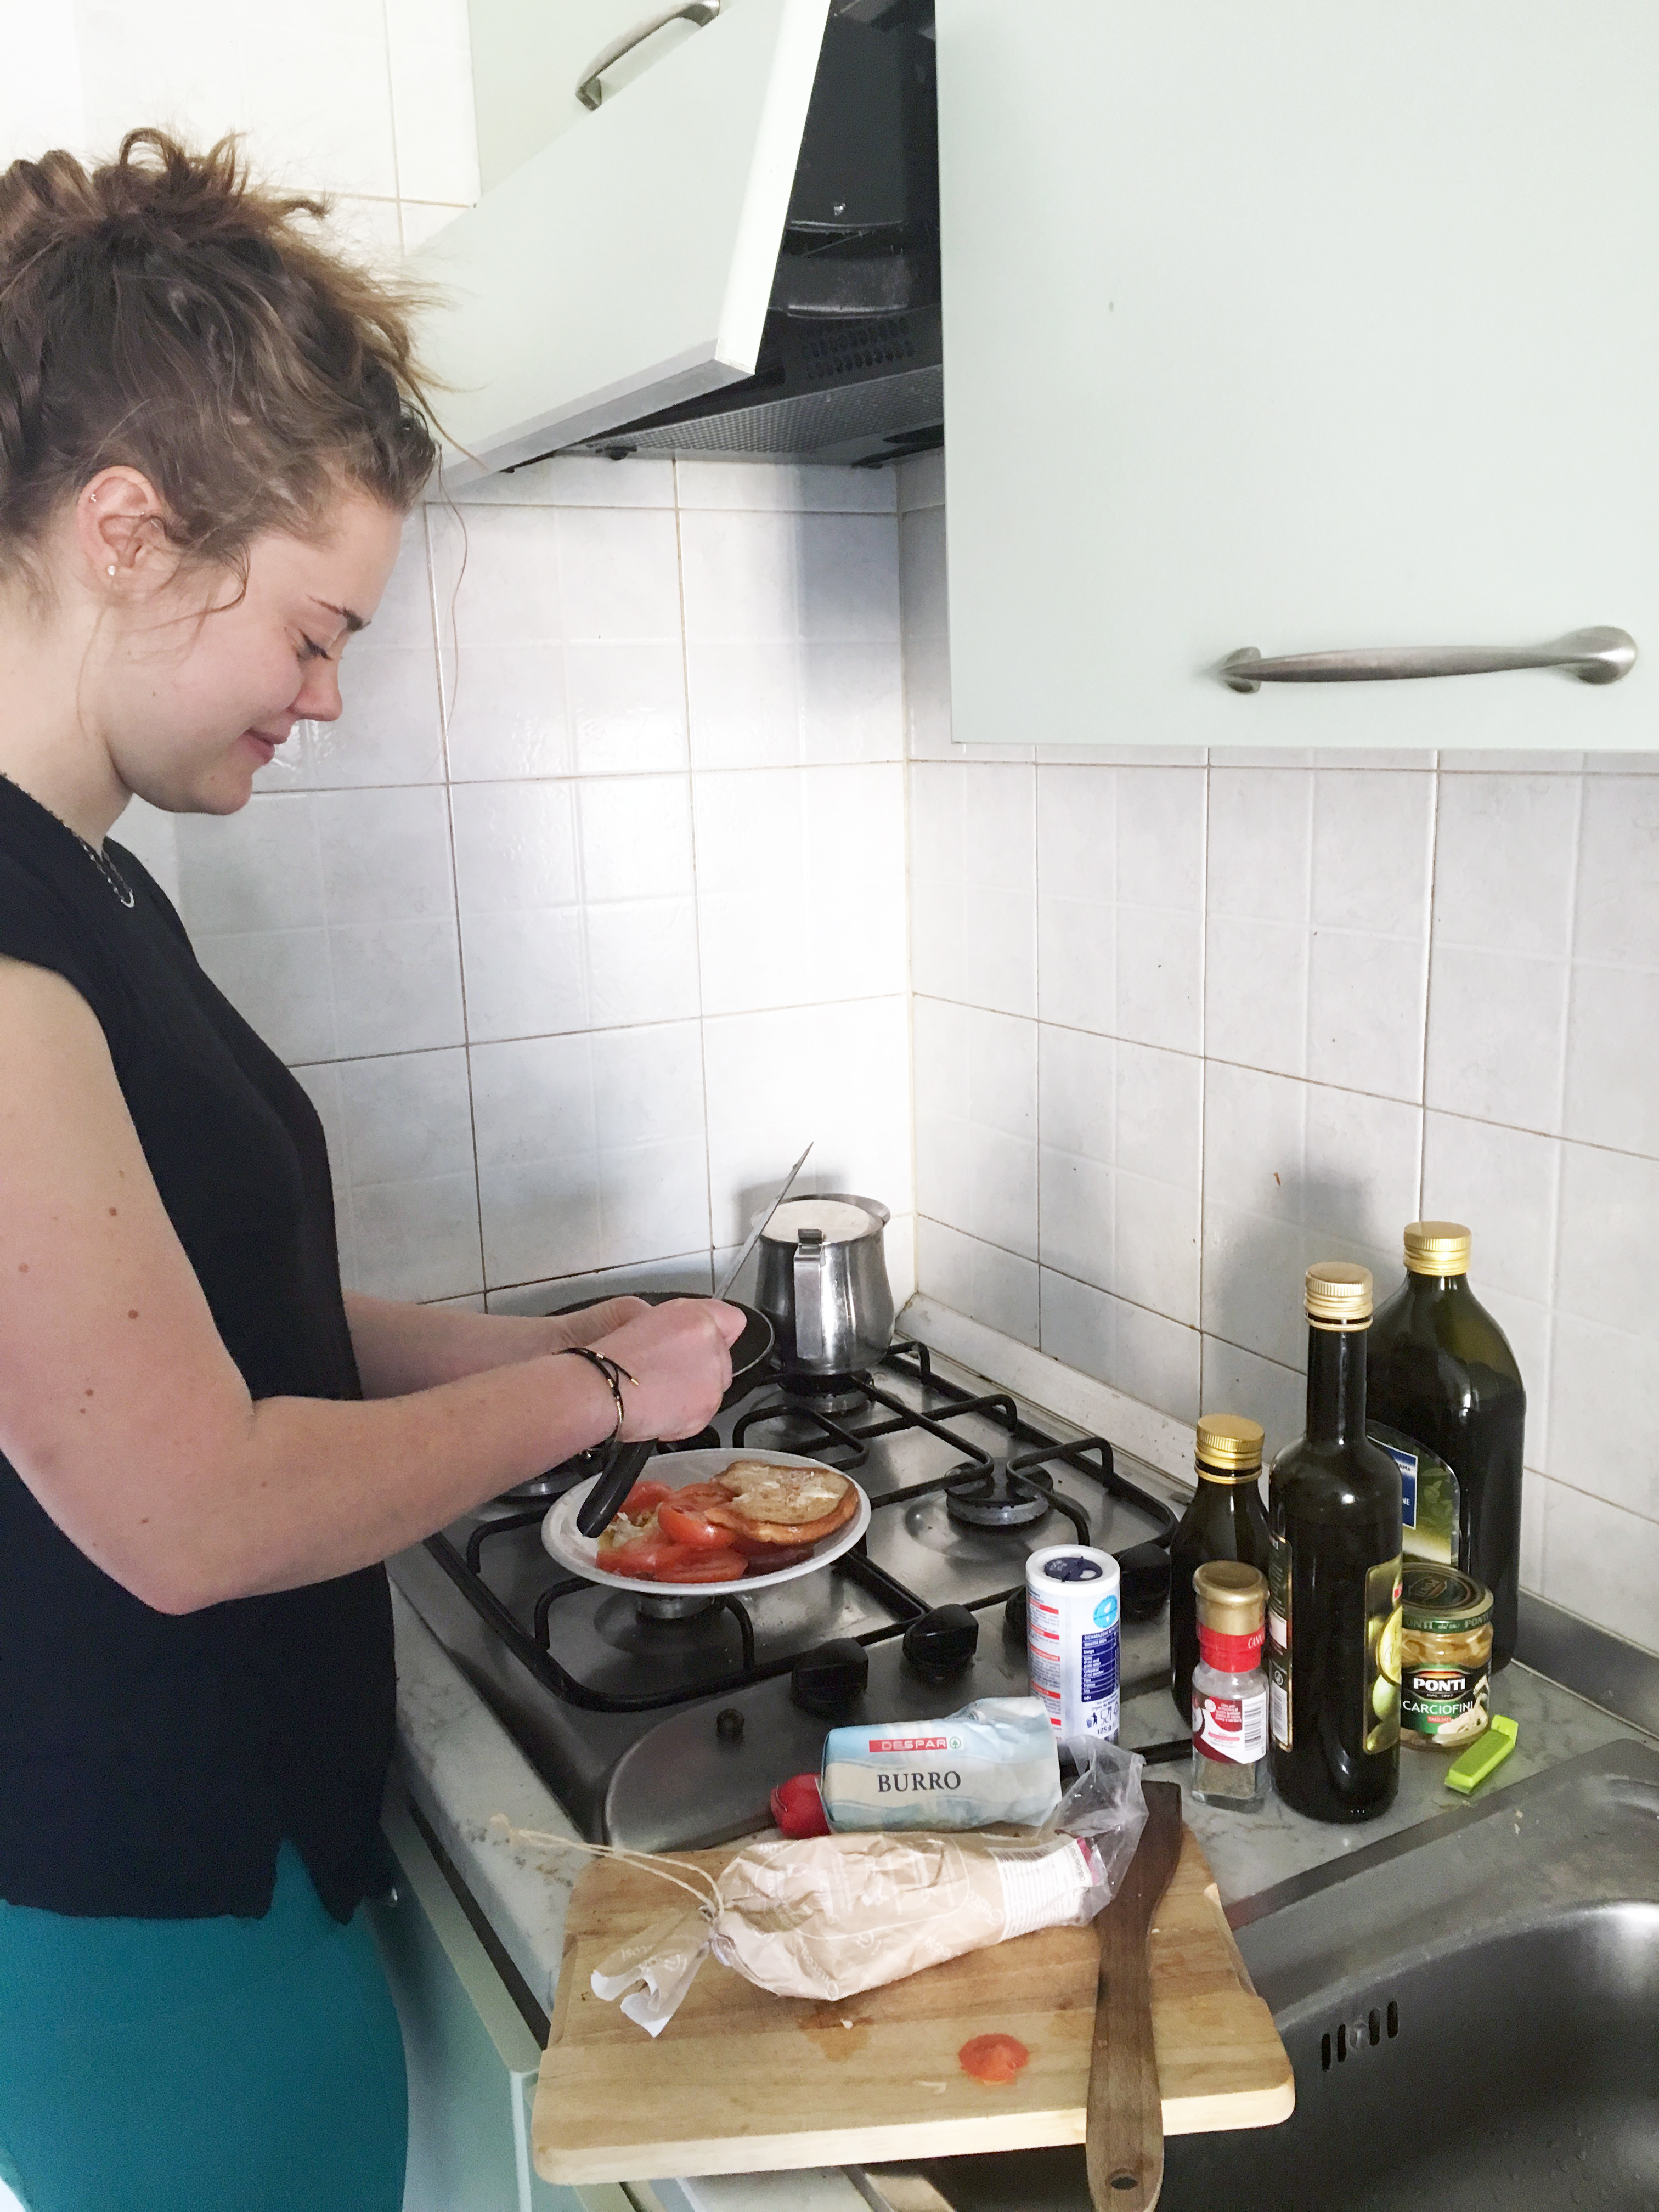 Student making dinner in the residence hall kitchen in Verona, Italy.